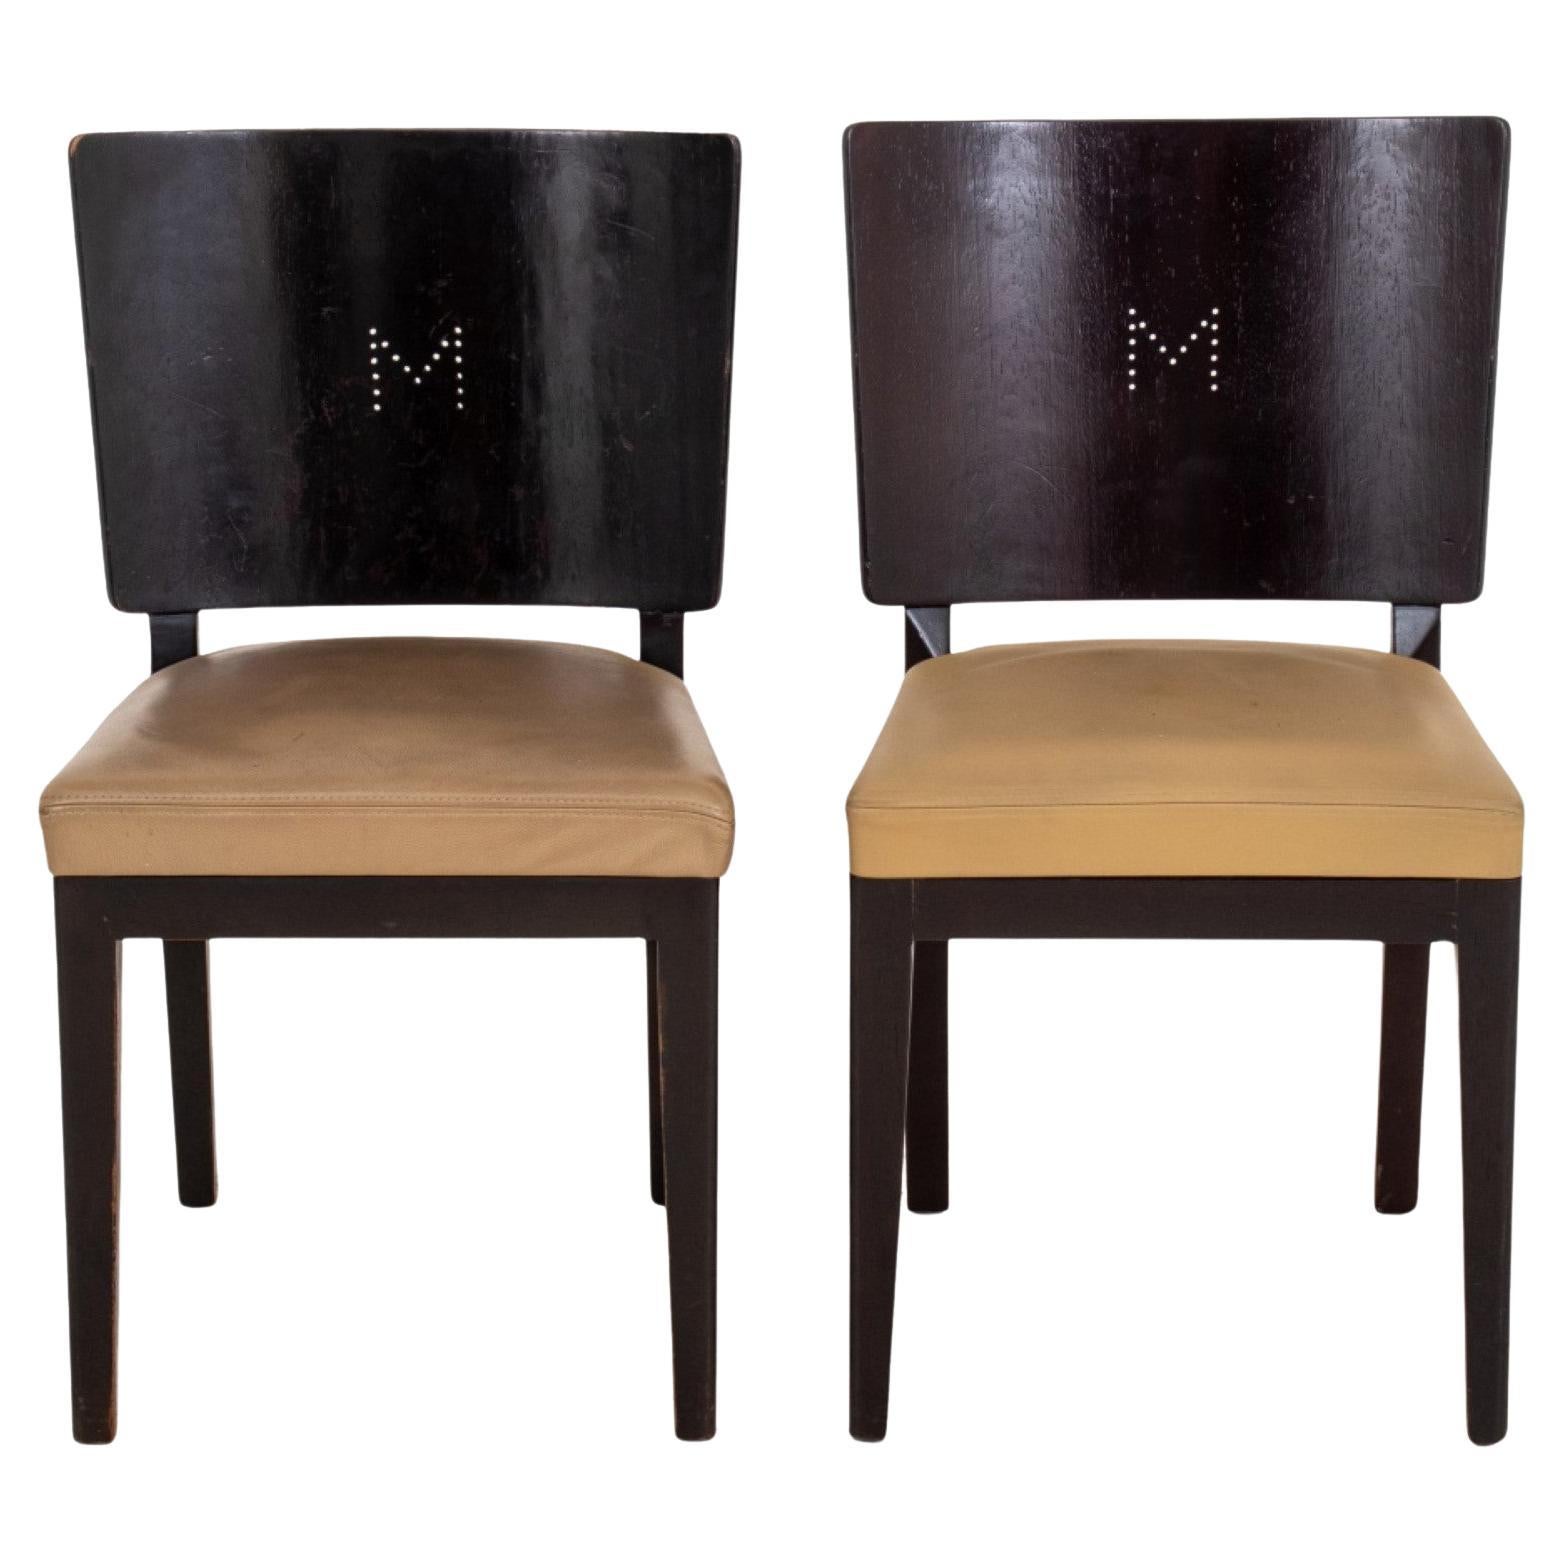 Christian Liaigre, Mercer Kitchen Dining Chairs, 2	Christian Liaigre, Mercer Kit For Sale